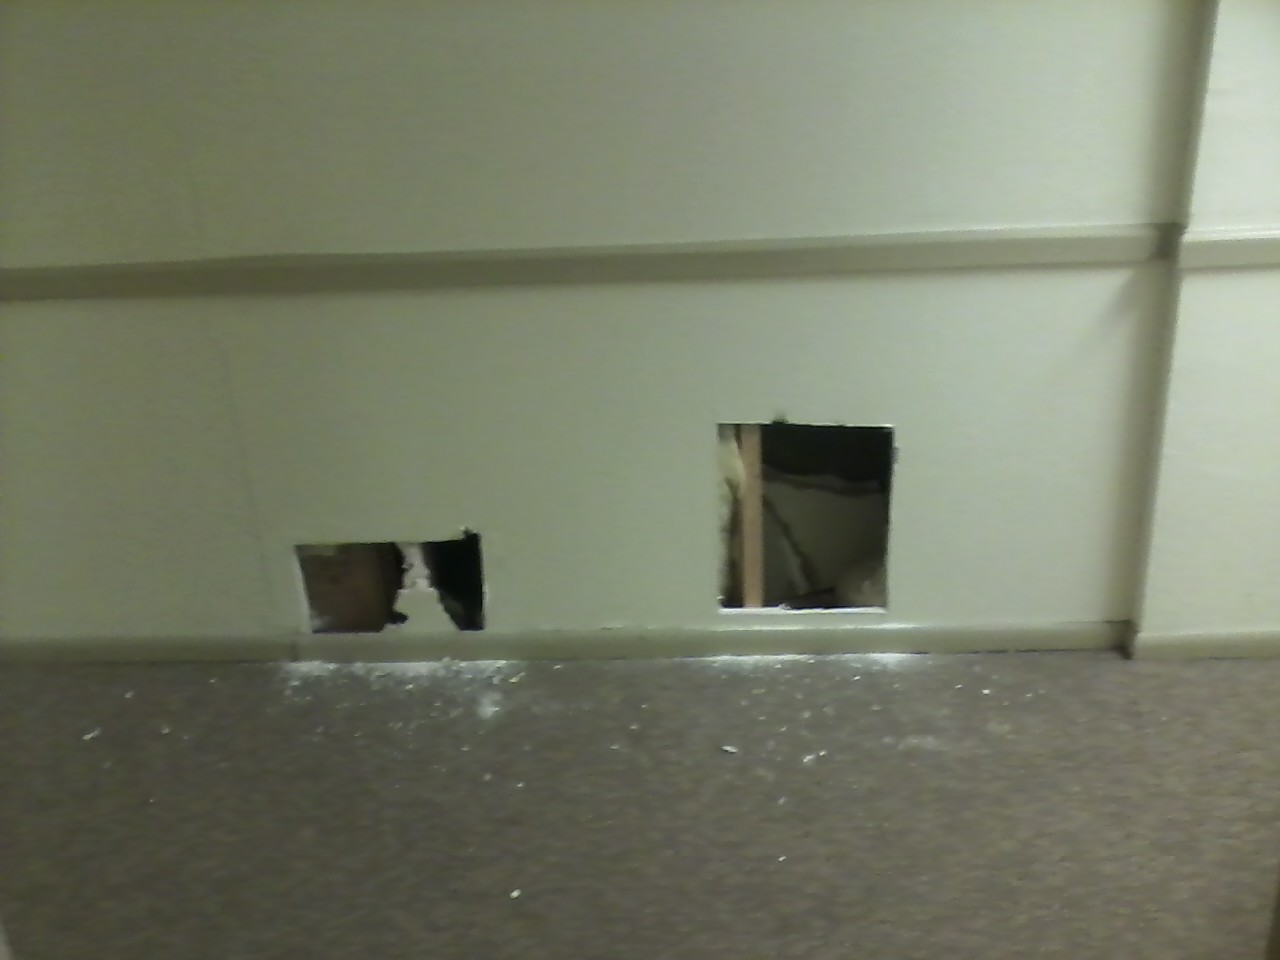 Many hallways have obvious holes in the walls, from water damage, broken pipes, etc.